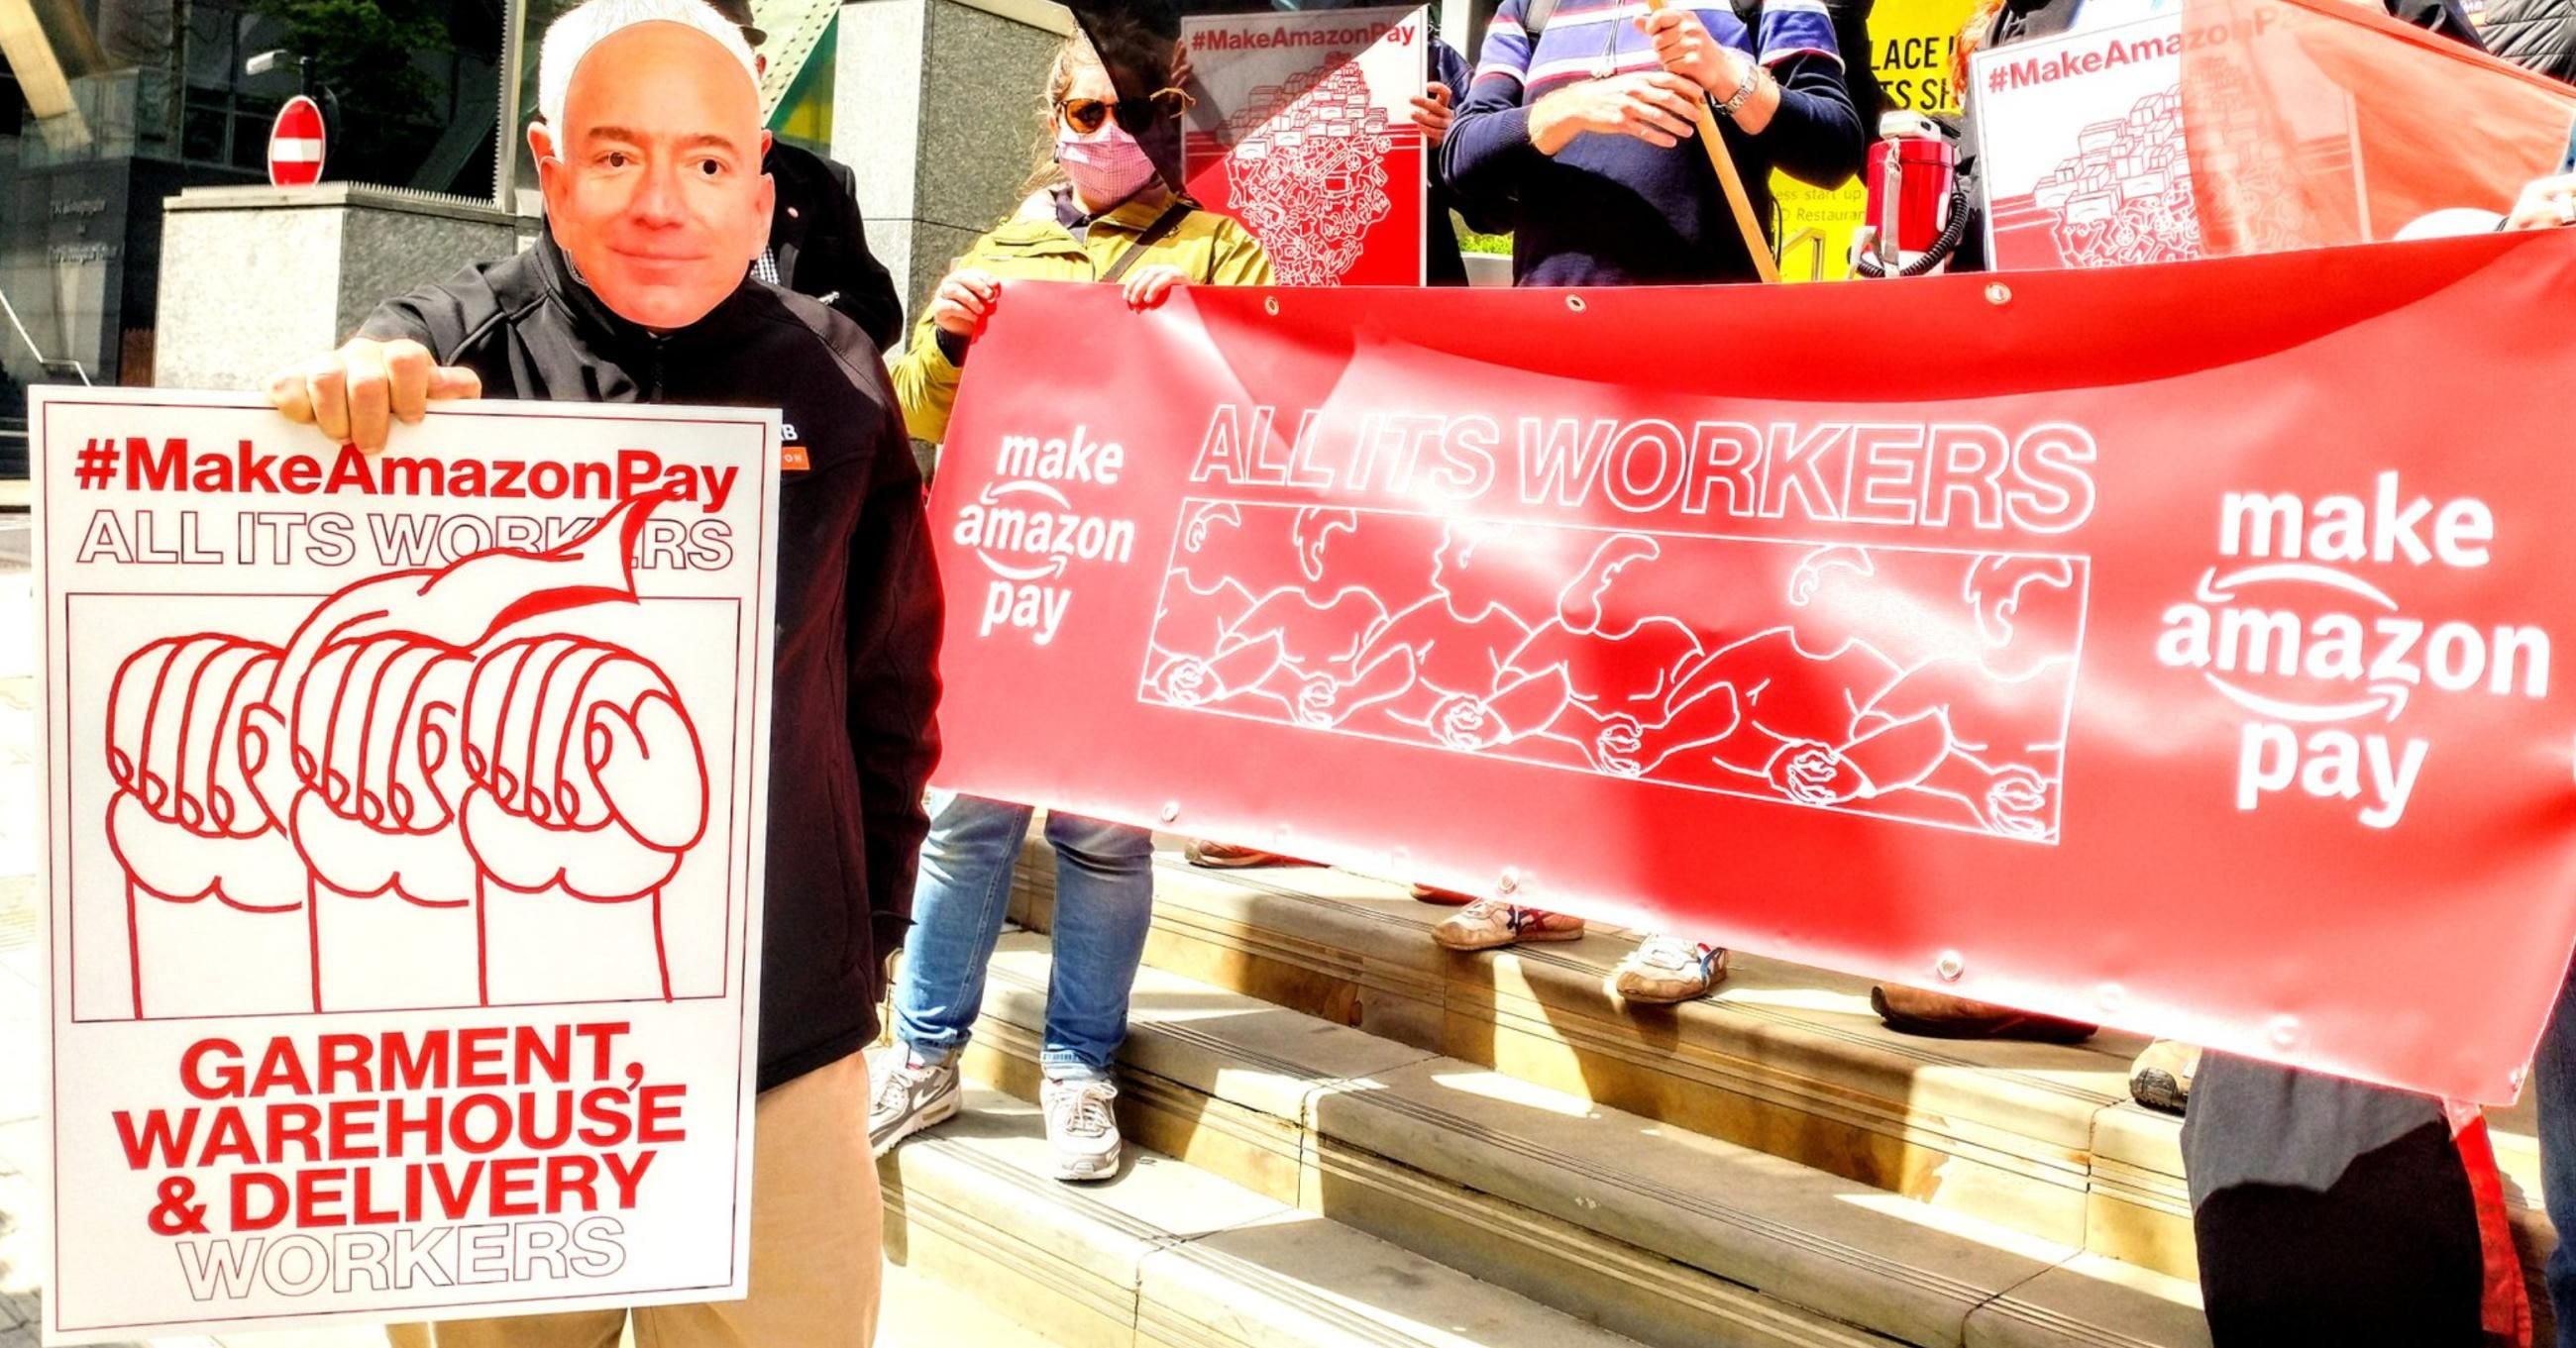 Members of Britain's GMB Union demonstrate outside Amazon's United Kingdom headquarters on May 26, 2021 as part of a #MakeAmazonPay global day of action for workers' rights. (Photo: War on Want/Twitter)